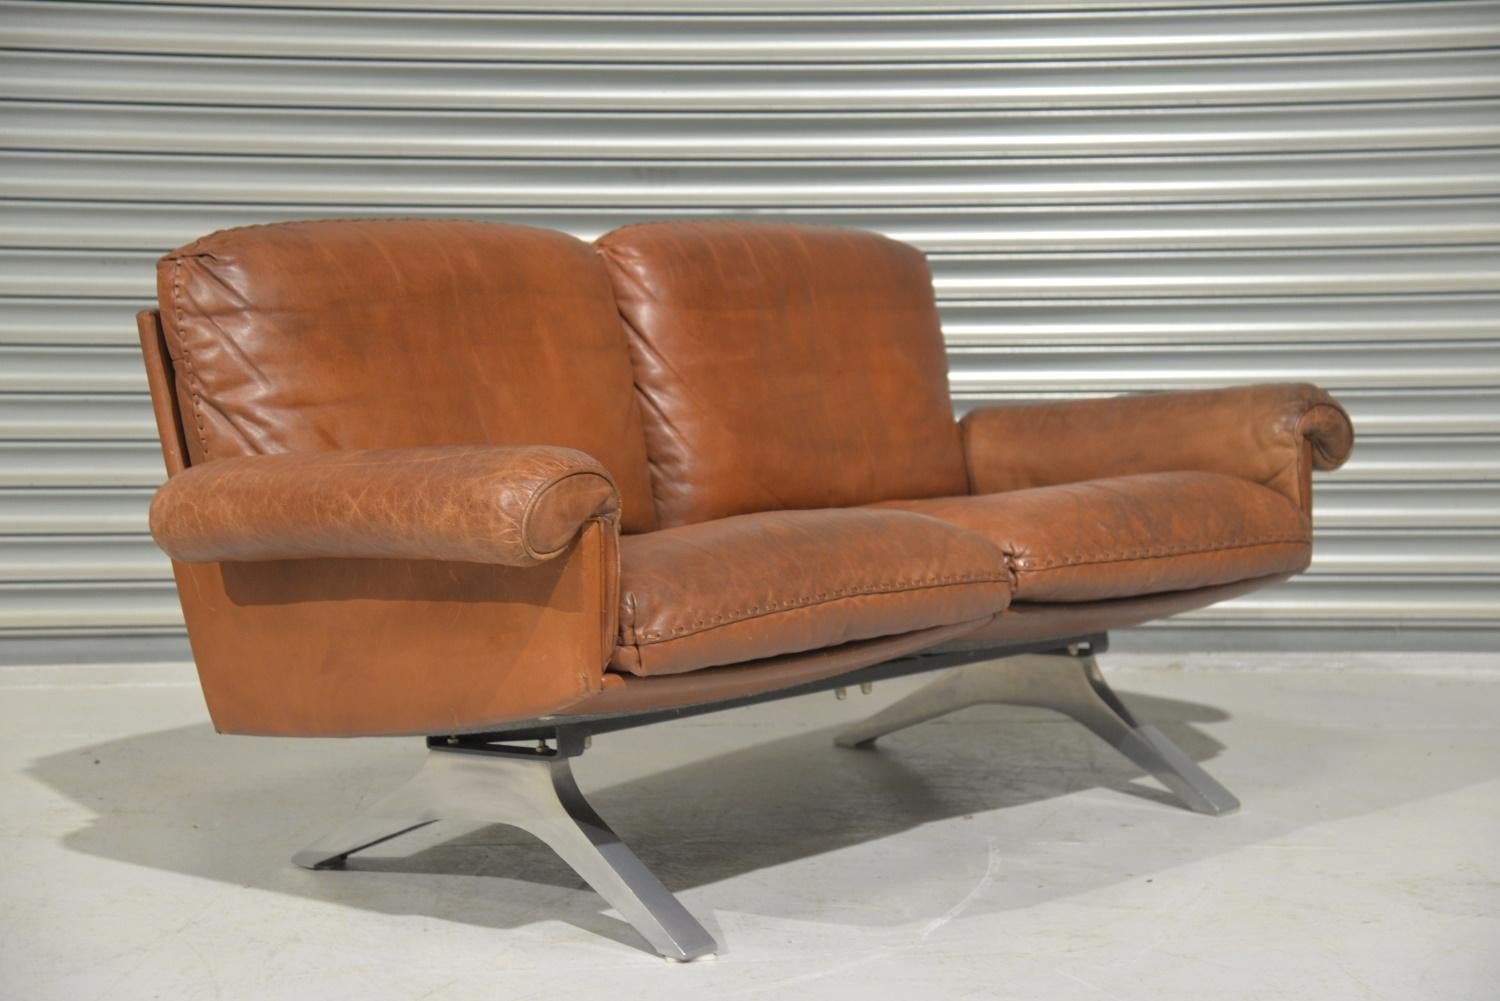 Vintage De Sede DS 31 Leather Two-Seat Sofa or Loveseat, Switzerland, 1970s For Sale 3